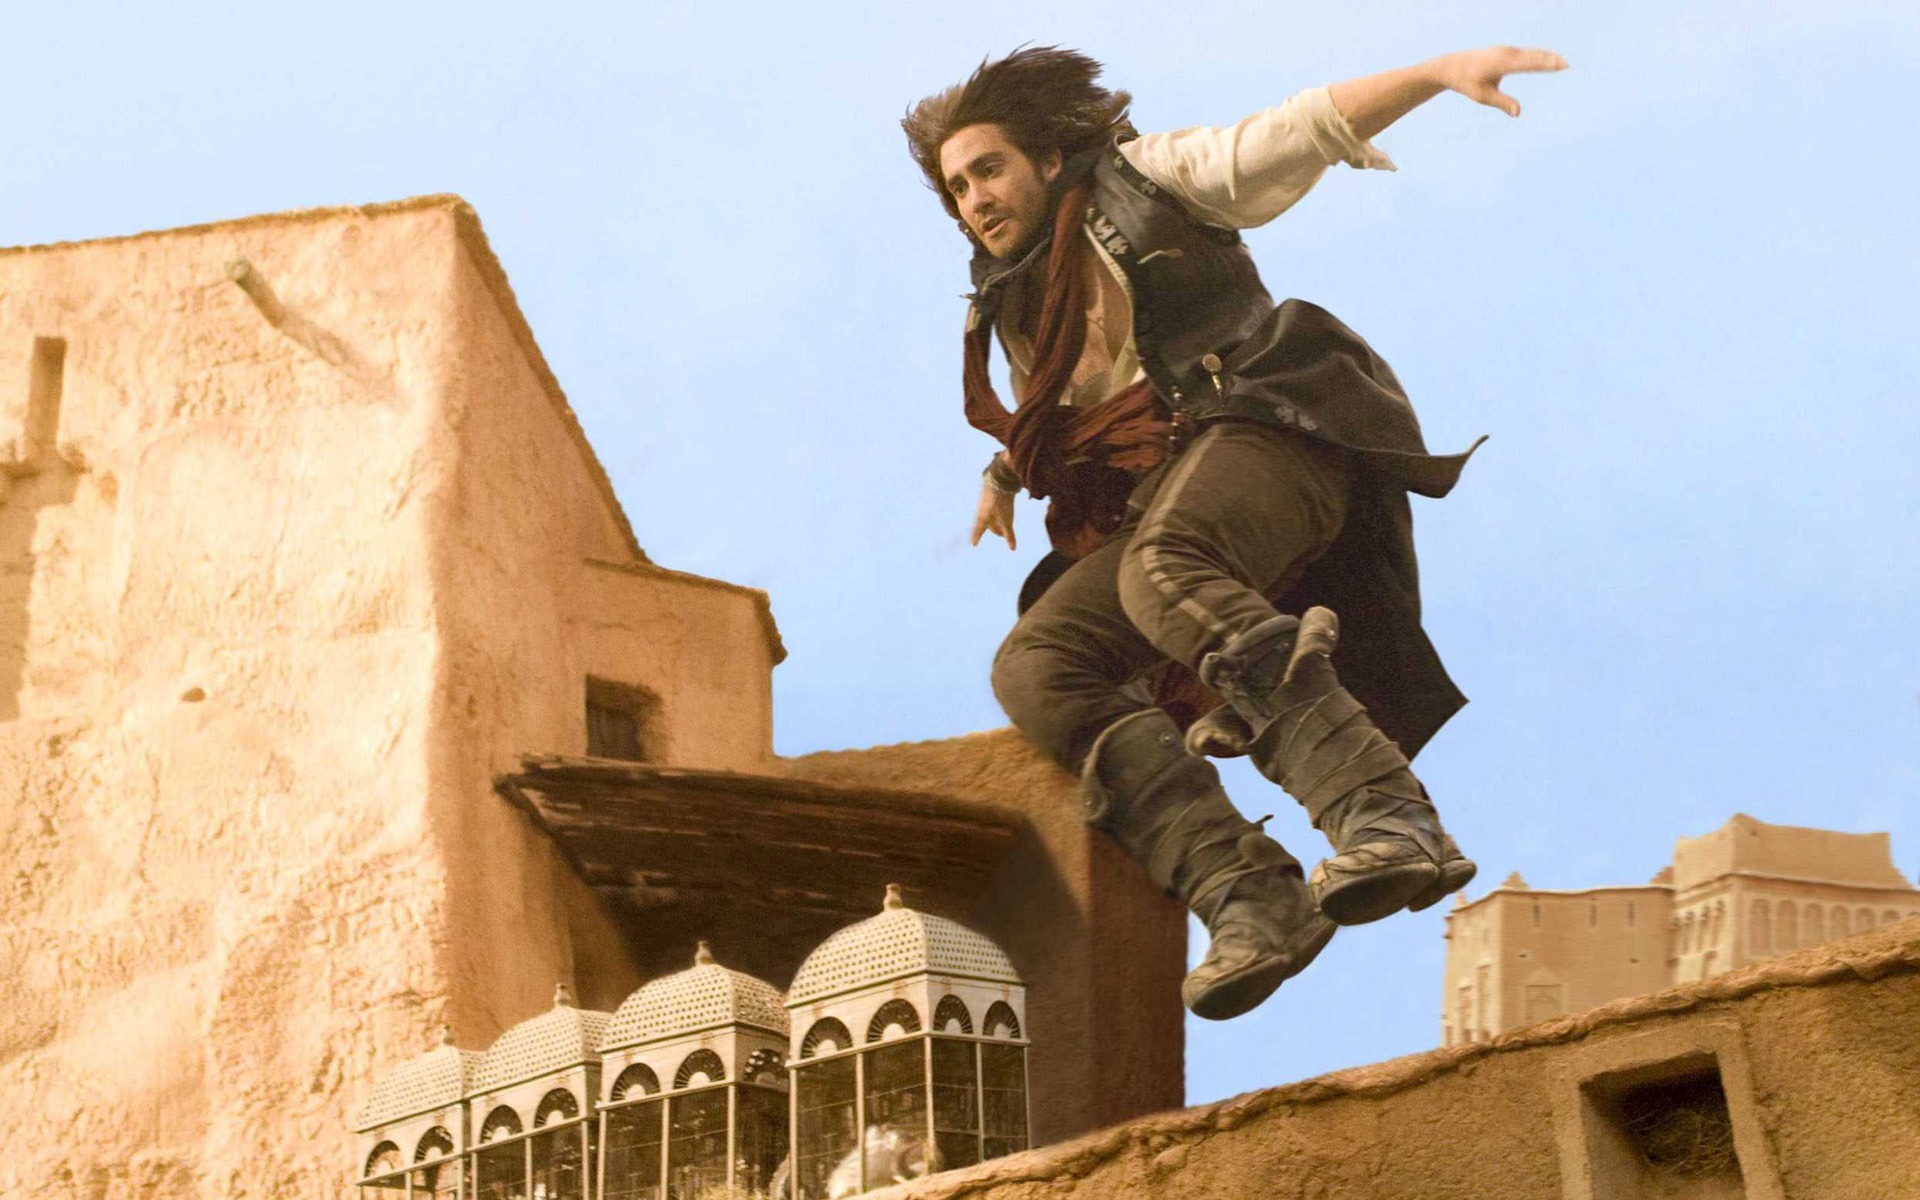 Prince of Persia The Sands of Time 波斯王子：時之刃 #12 - 1920x1200